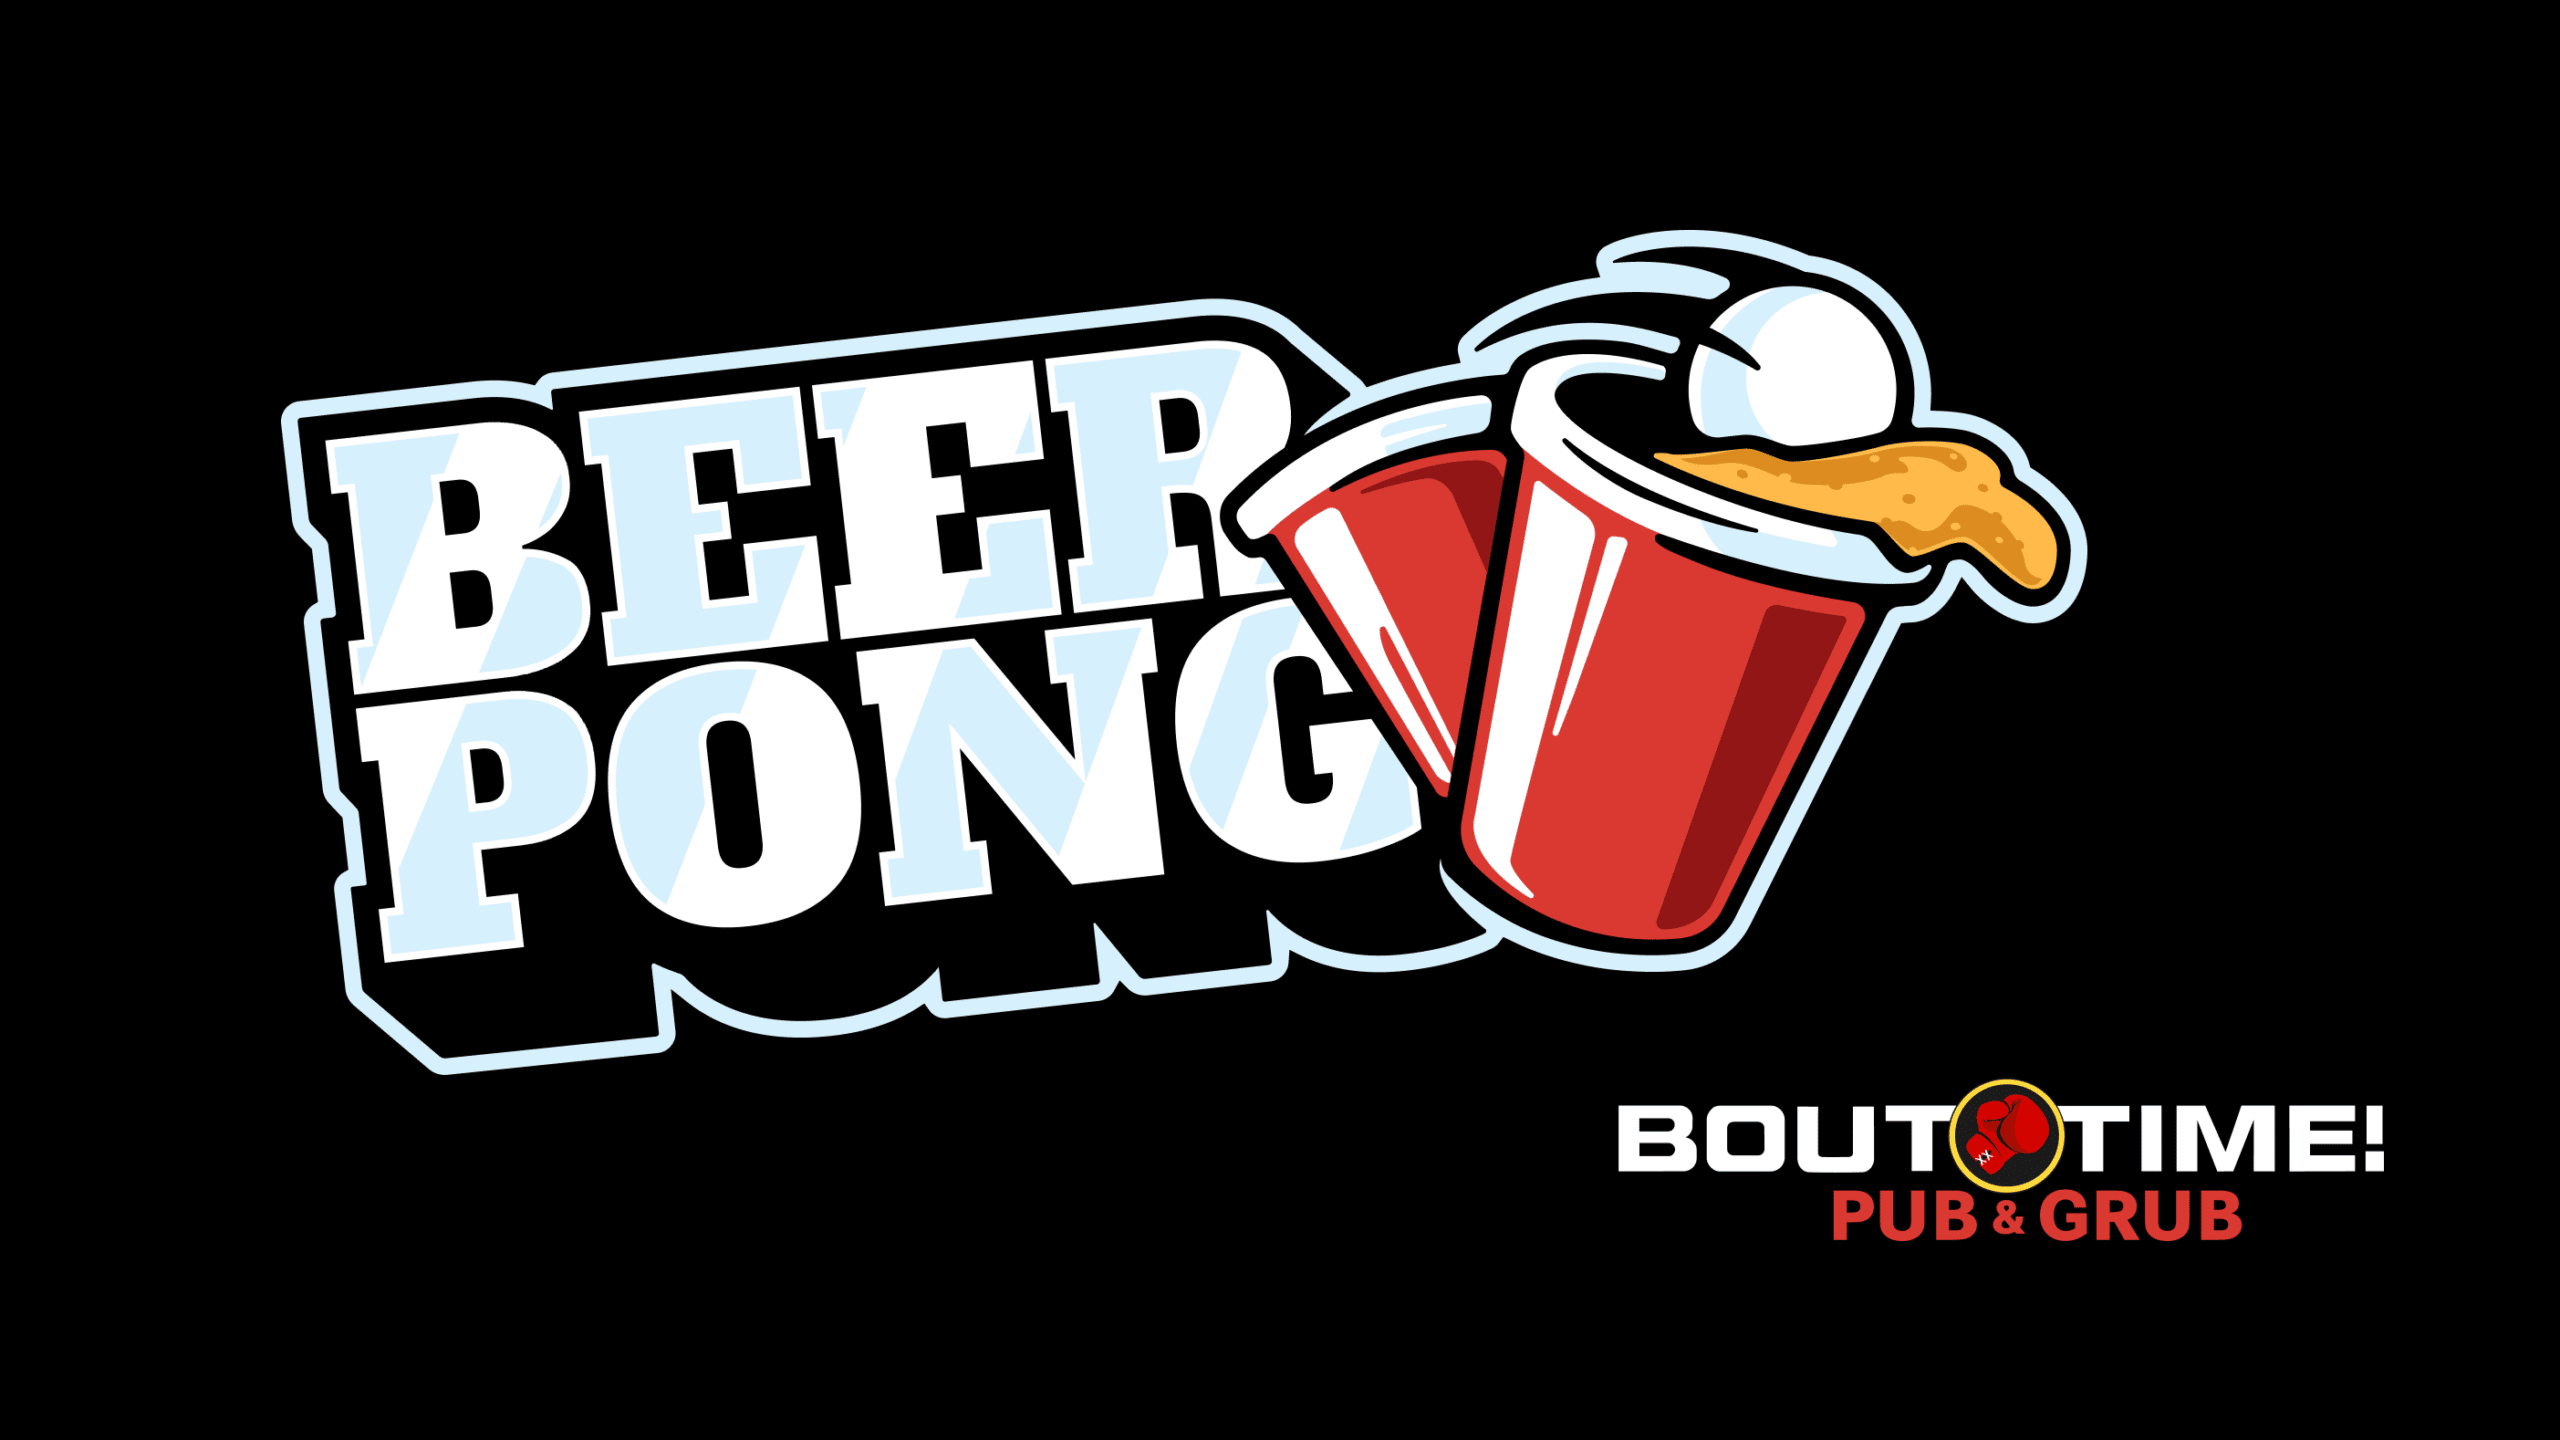 Illustrated letters that say BEER PONG and two red solo cups with a ping pong ball splashing into beer.